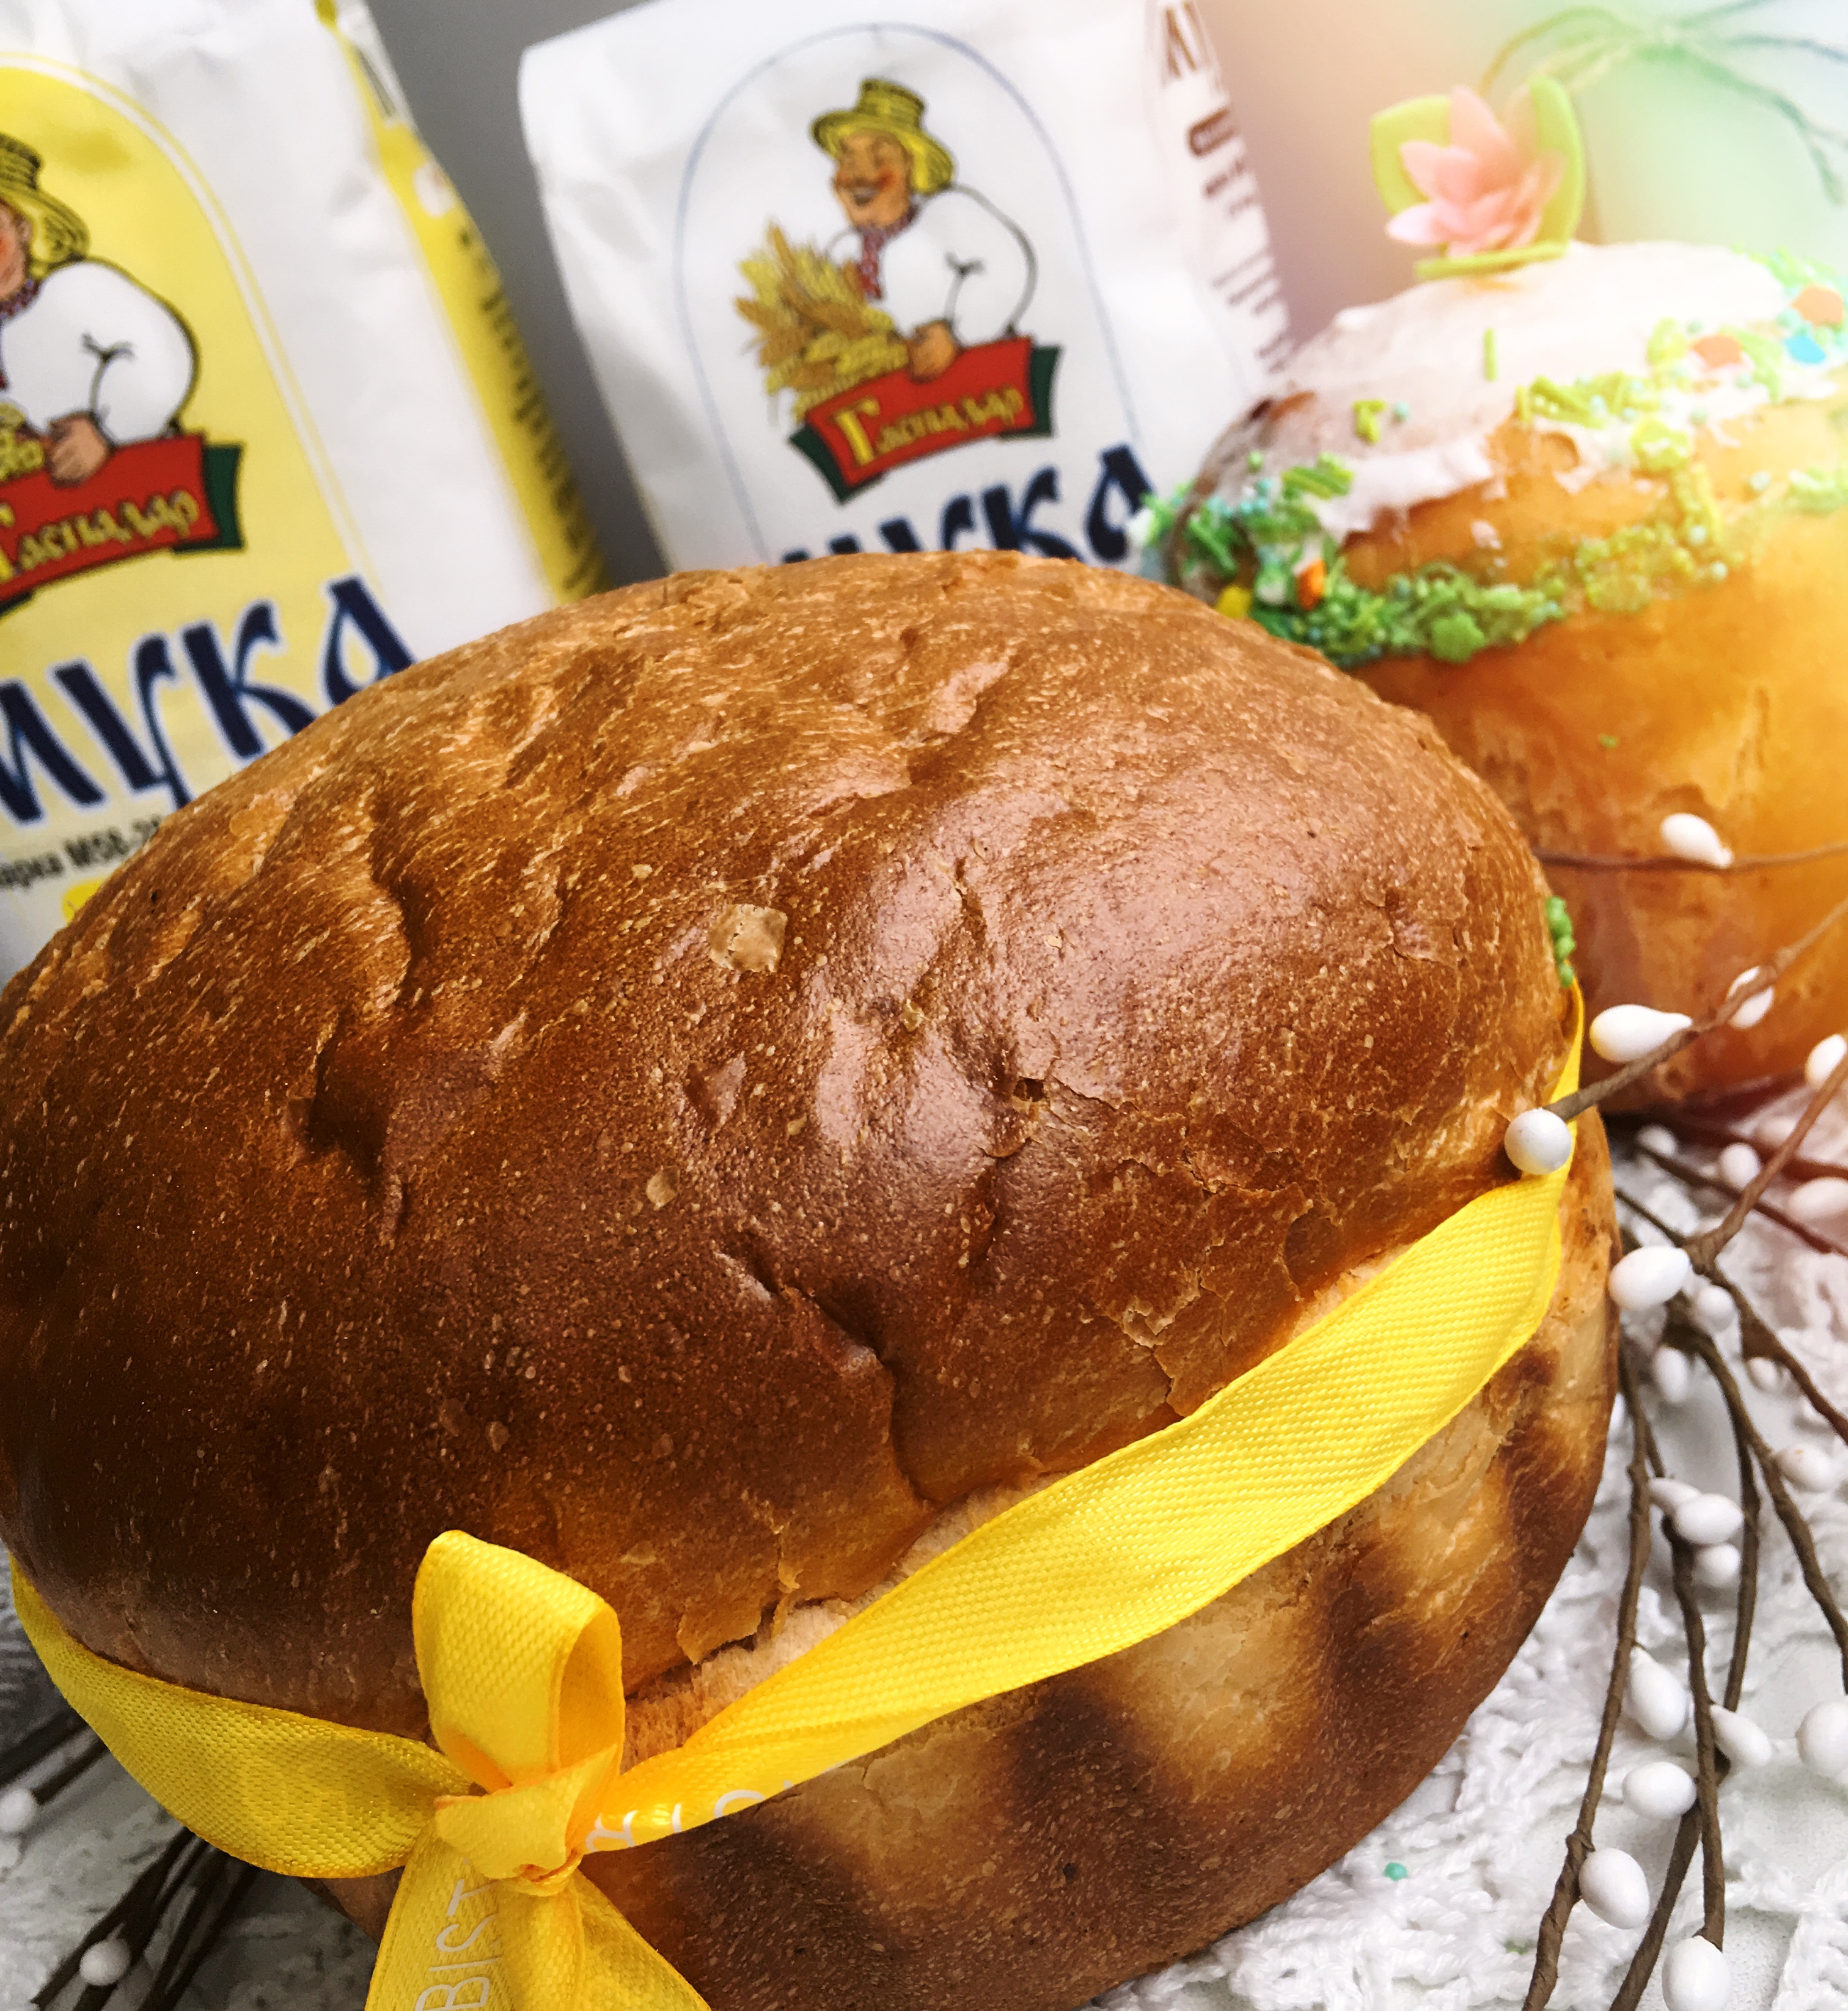 #stayathome with flour "Gaspadar" and get ready for Easter